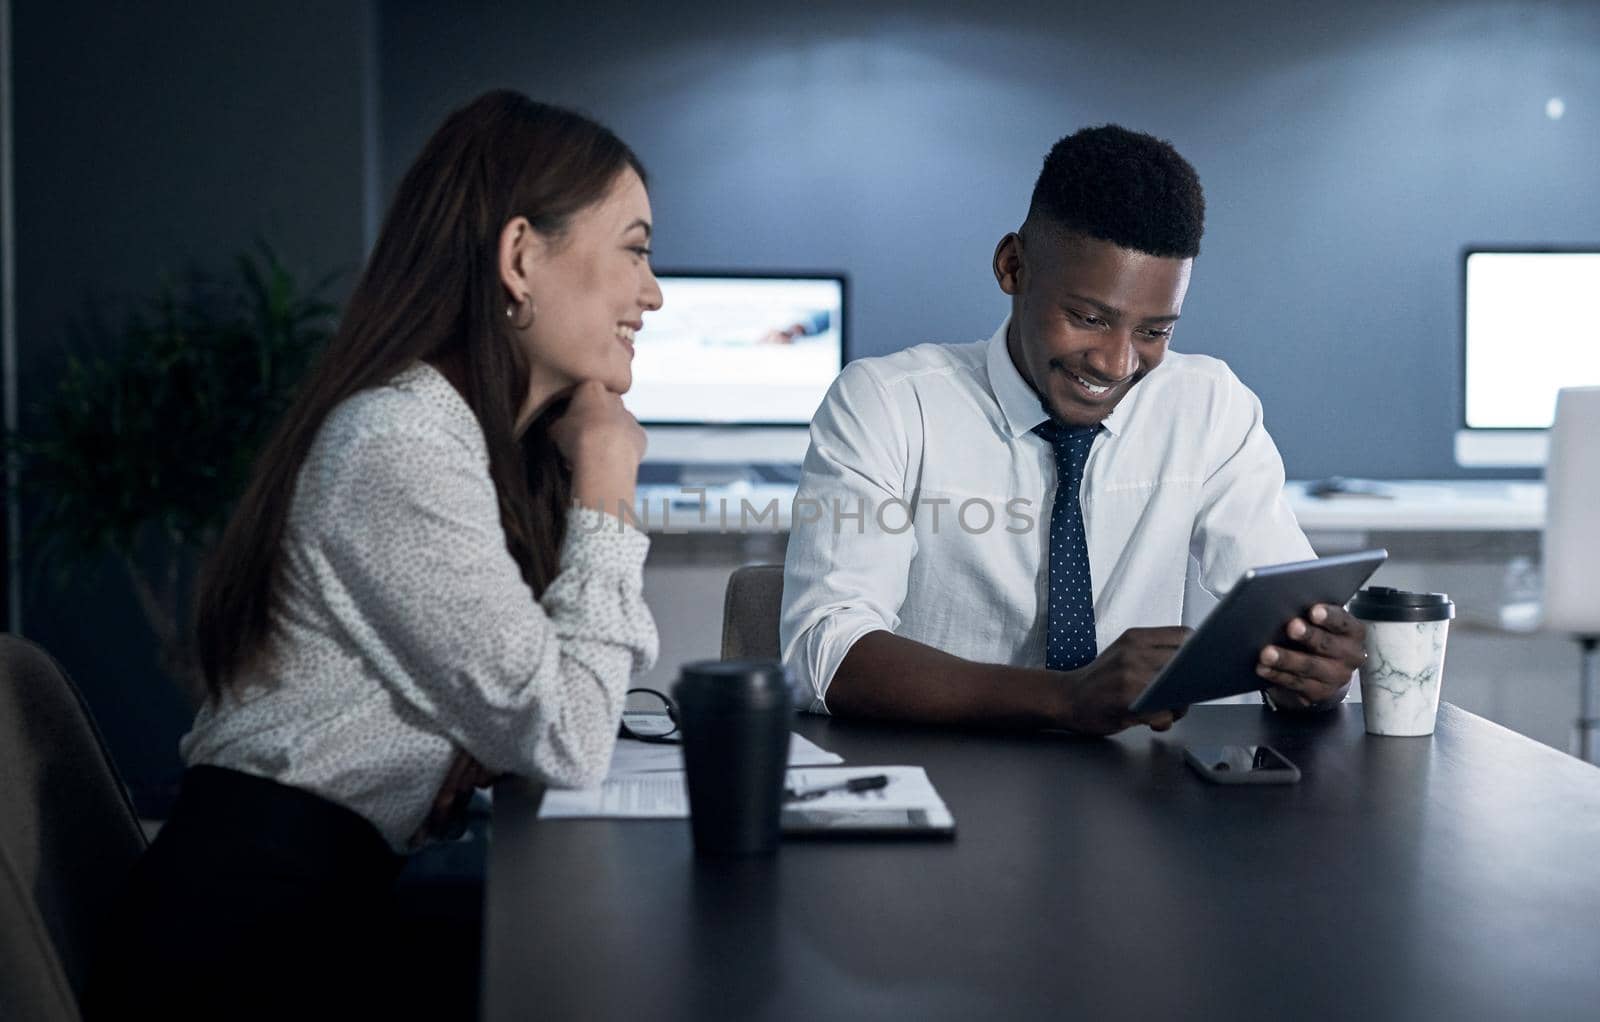 Striking success no matter the time. two businesspeople working together in an office at night